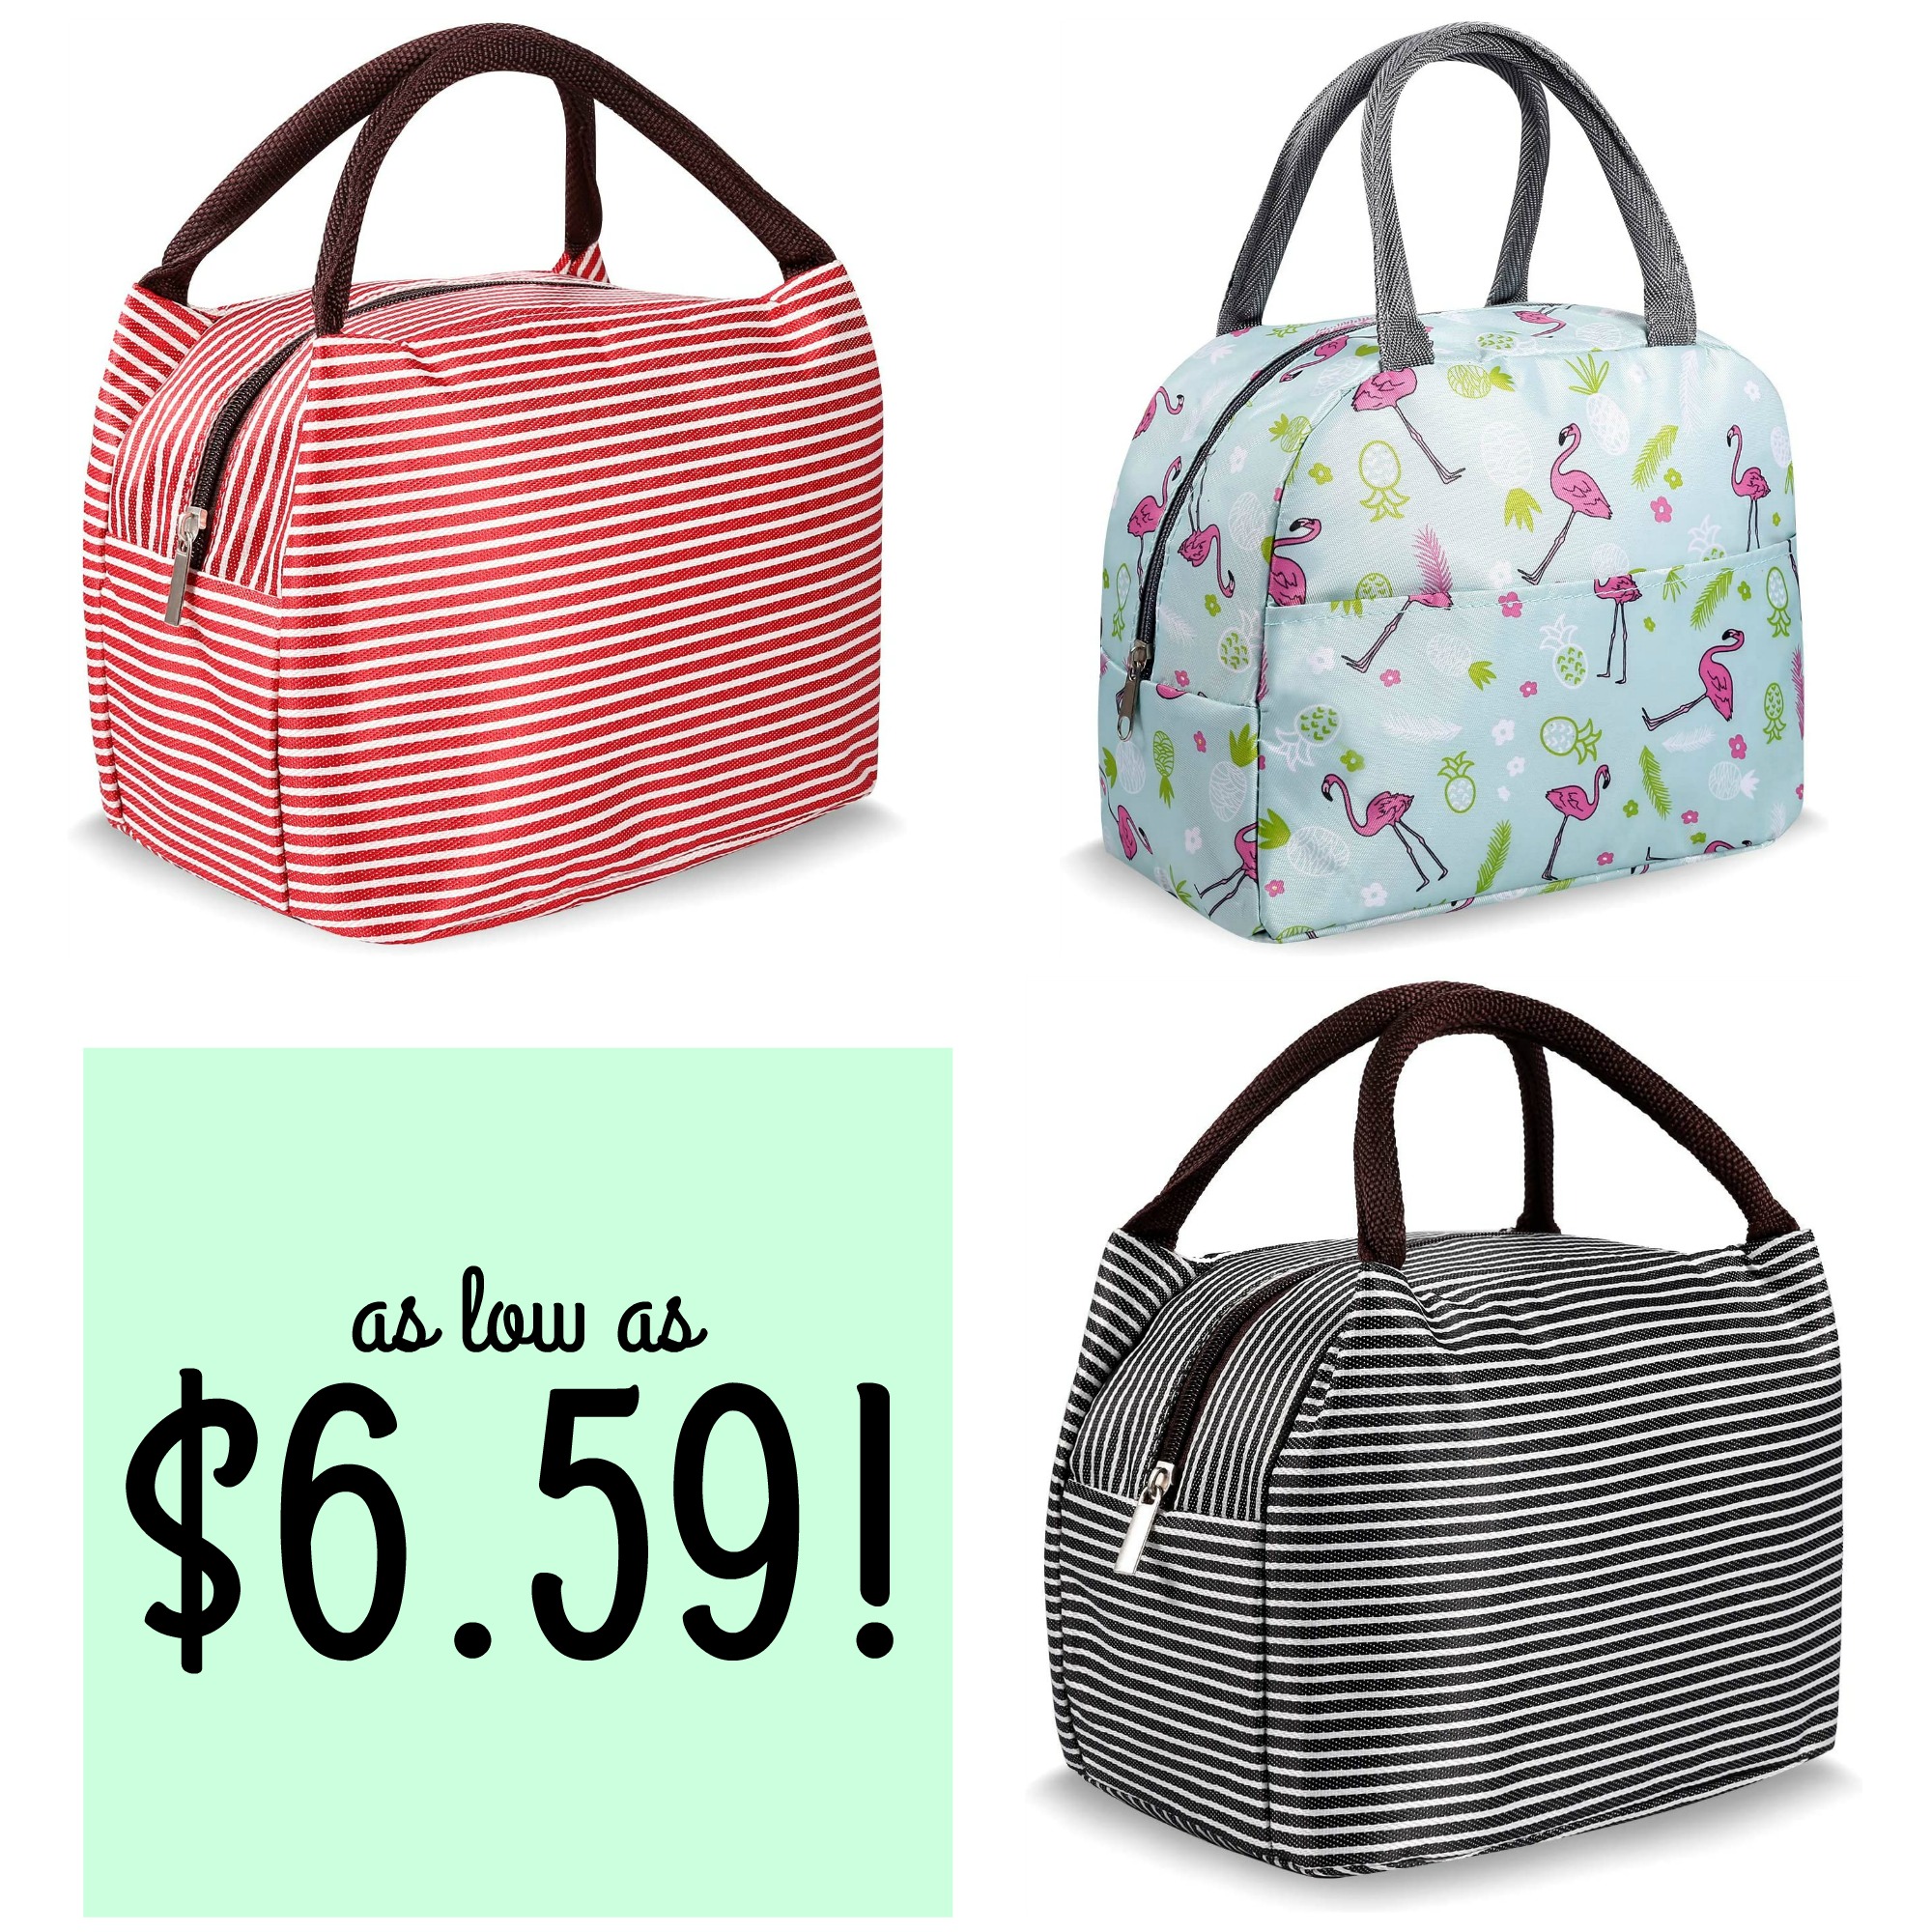 Insulated Zip Lunch Bag as low as $6.59! - Become a Coupon Queen